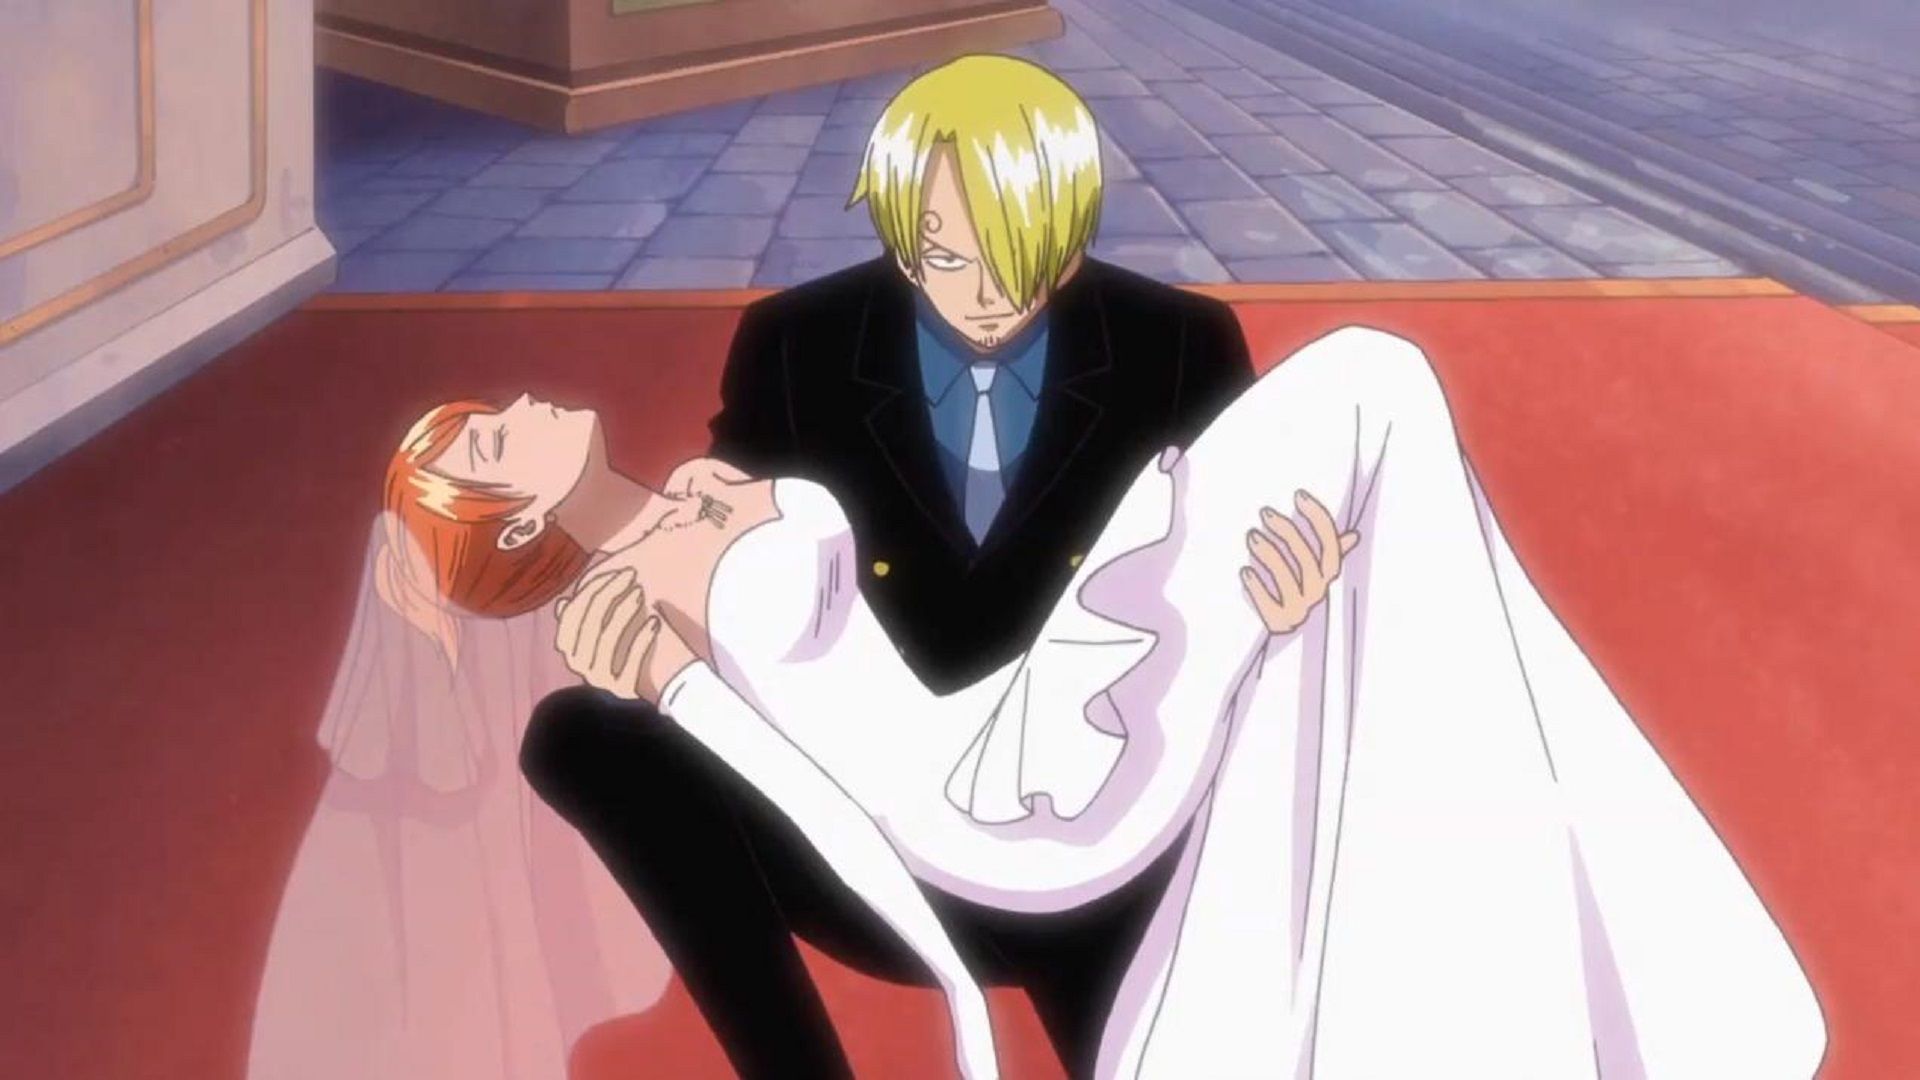 One Piece chapter 1113: Dr. Vegapunk corners the Gorosei as Sanji and Nami spring into action (Image via Toei Animation)